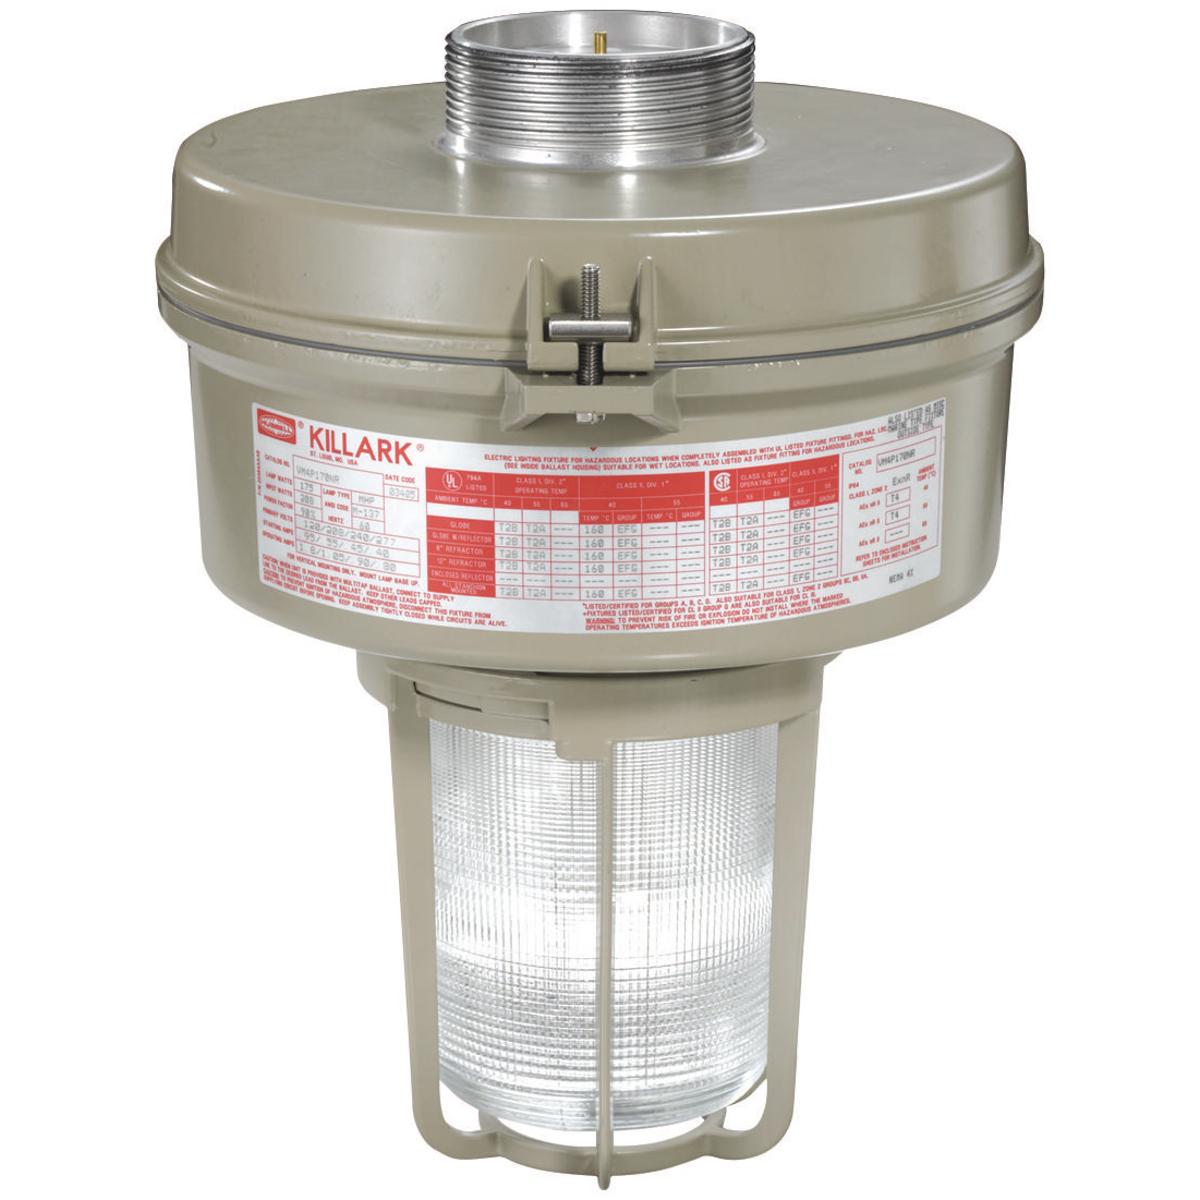 Hubbell VM3P205EZR5G VM3 Series - 200W Metal Halide 480V - EZ Mount Adapter -  Type V Glass Refractor and Guard  ; Ballast tank and splice box – corrosion resistant copper-free aluminum alloy with baked powder epoxy/polyester finish, electrostatically applied for complete, un